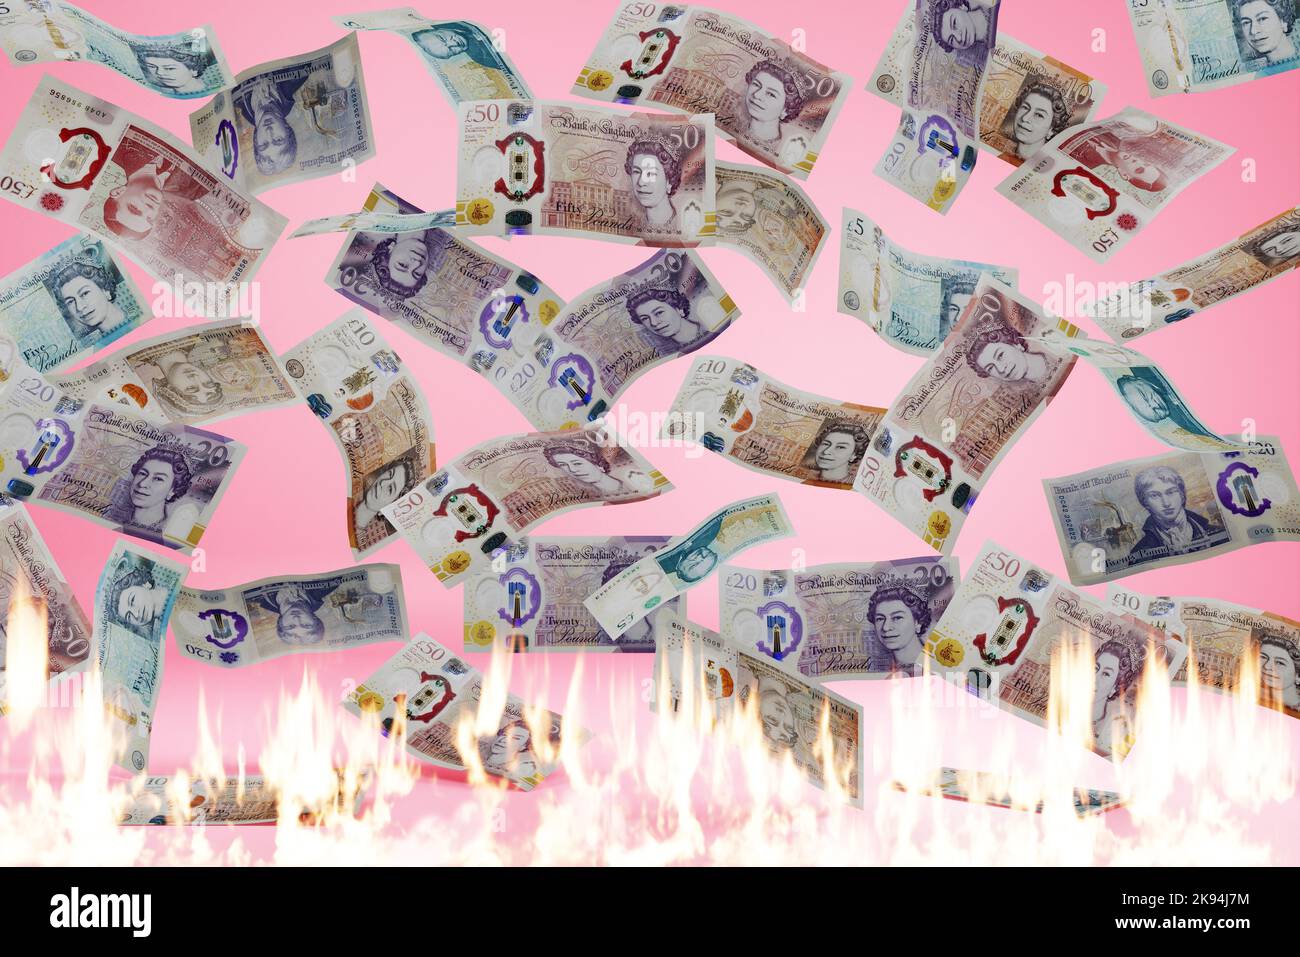 Falling UK money British pound drop dropping currency exchange fall burn concept polymer banknotes falling into fire and burning Stock Photo